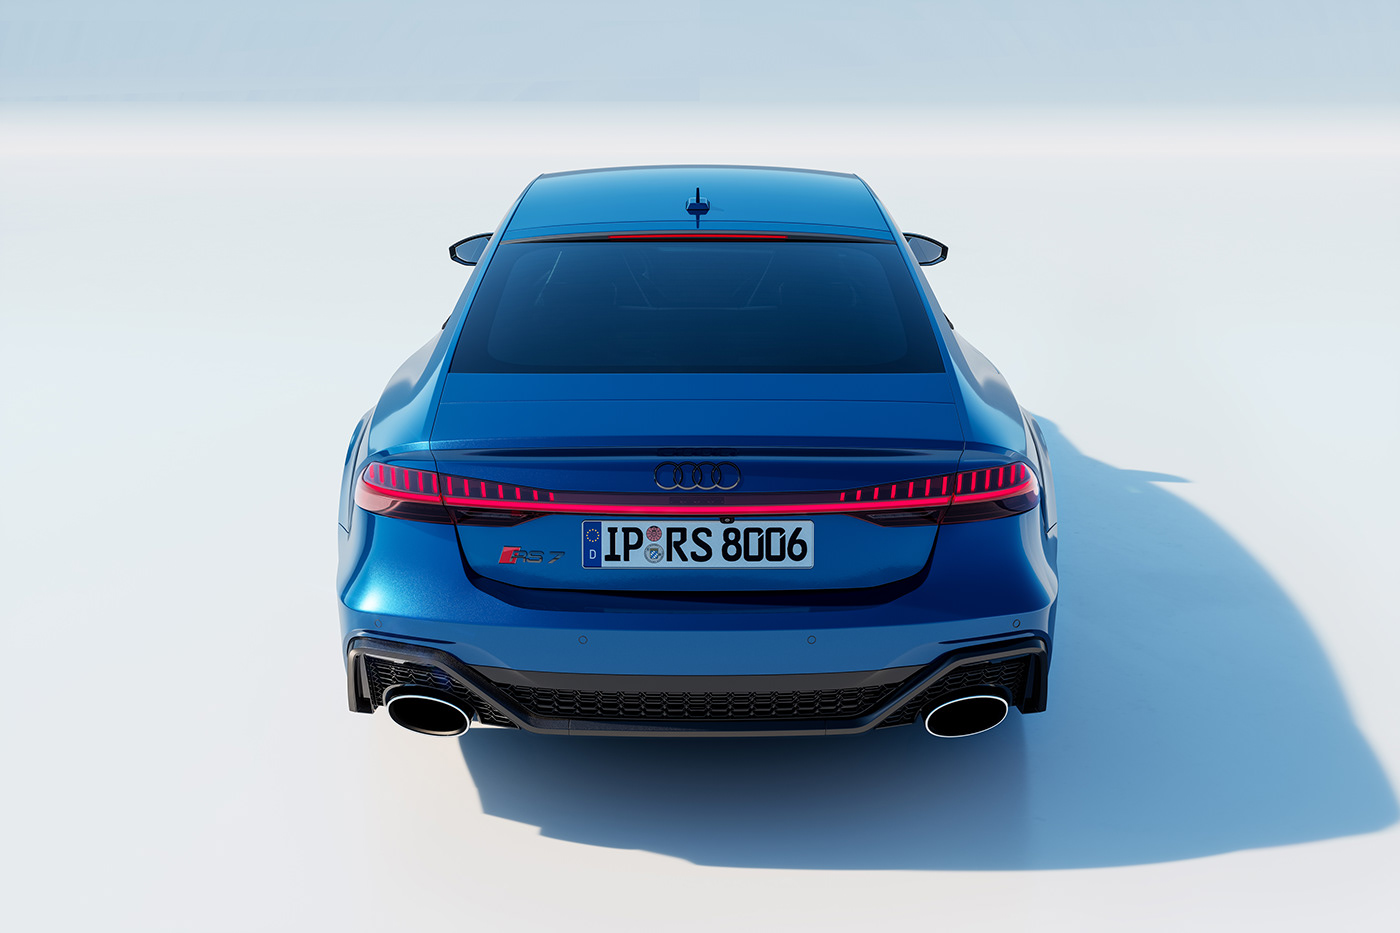 the rear camera angle for audi rs7 2020 sportback sepang blue color. natural daylight concept.